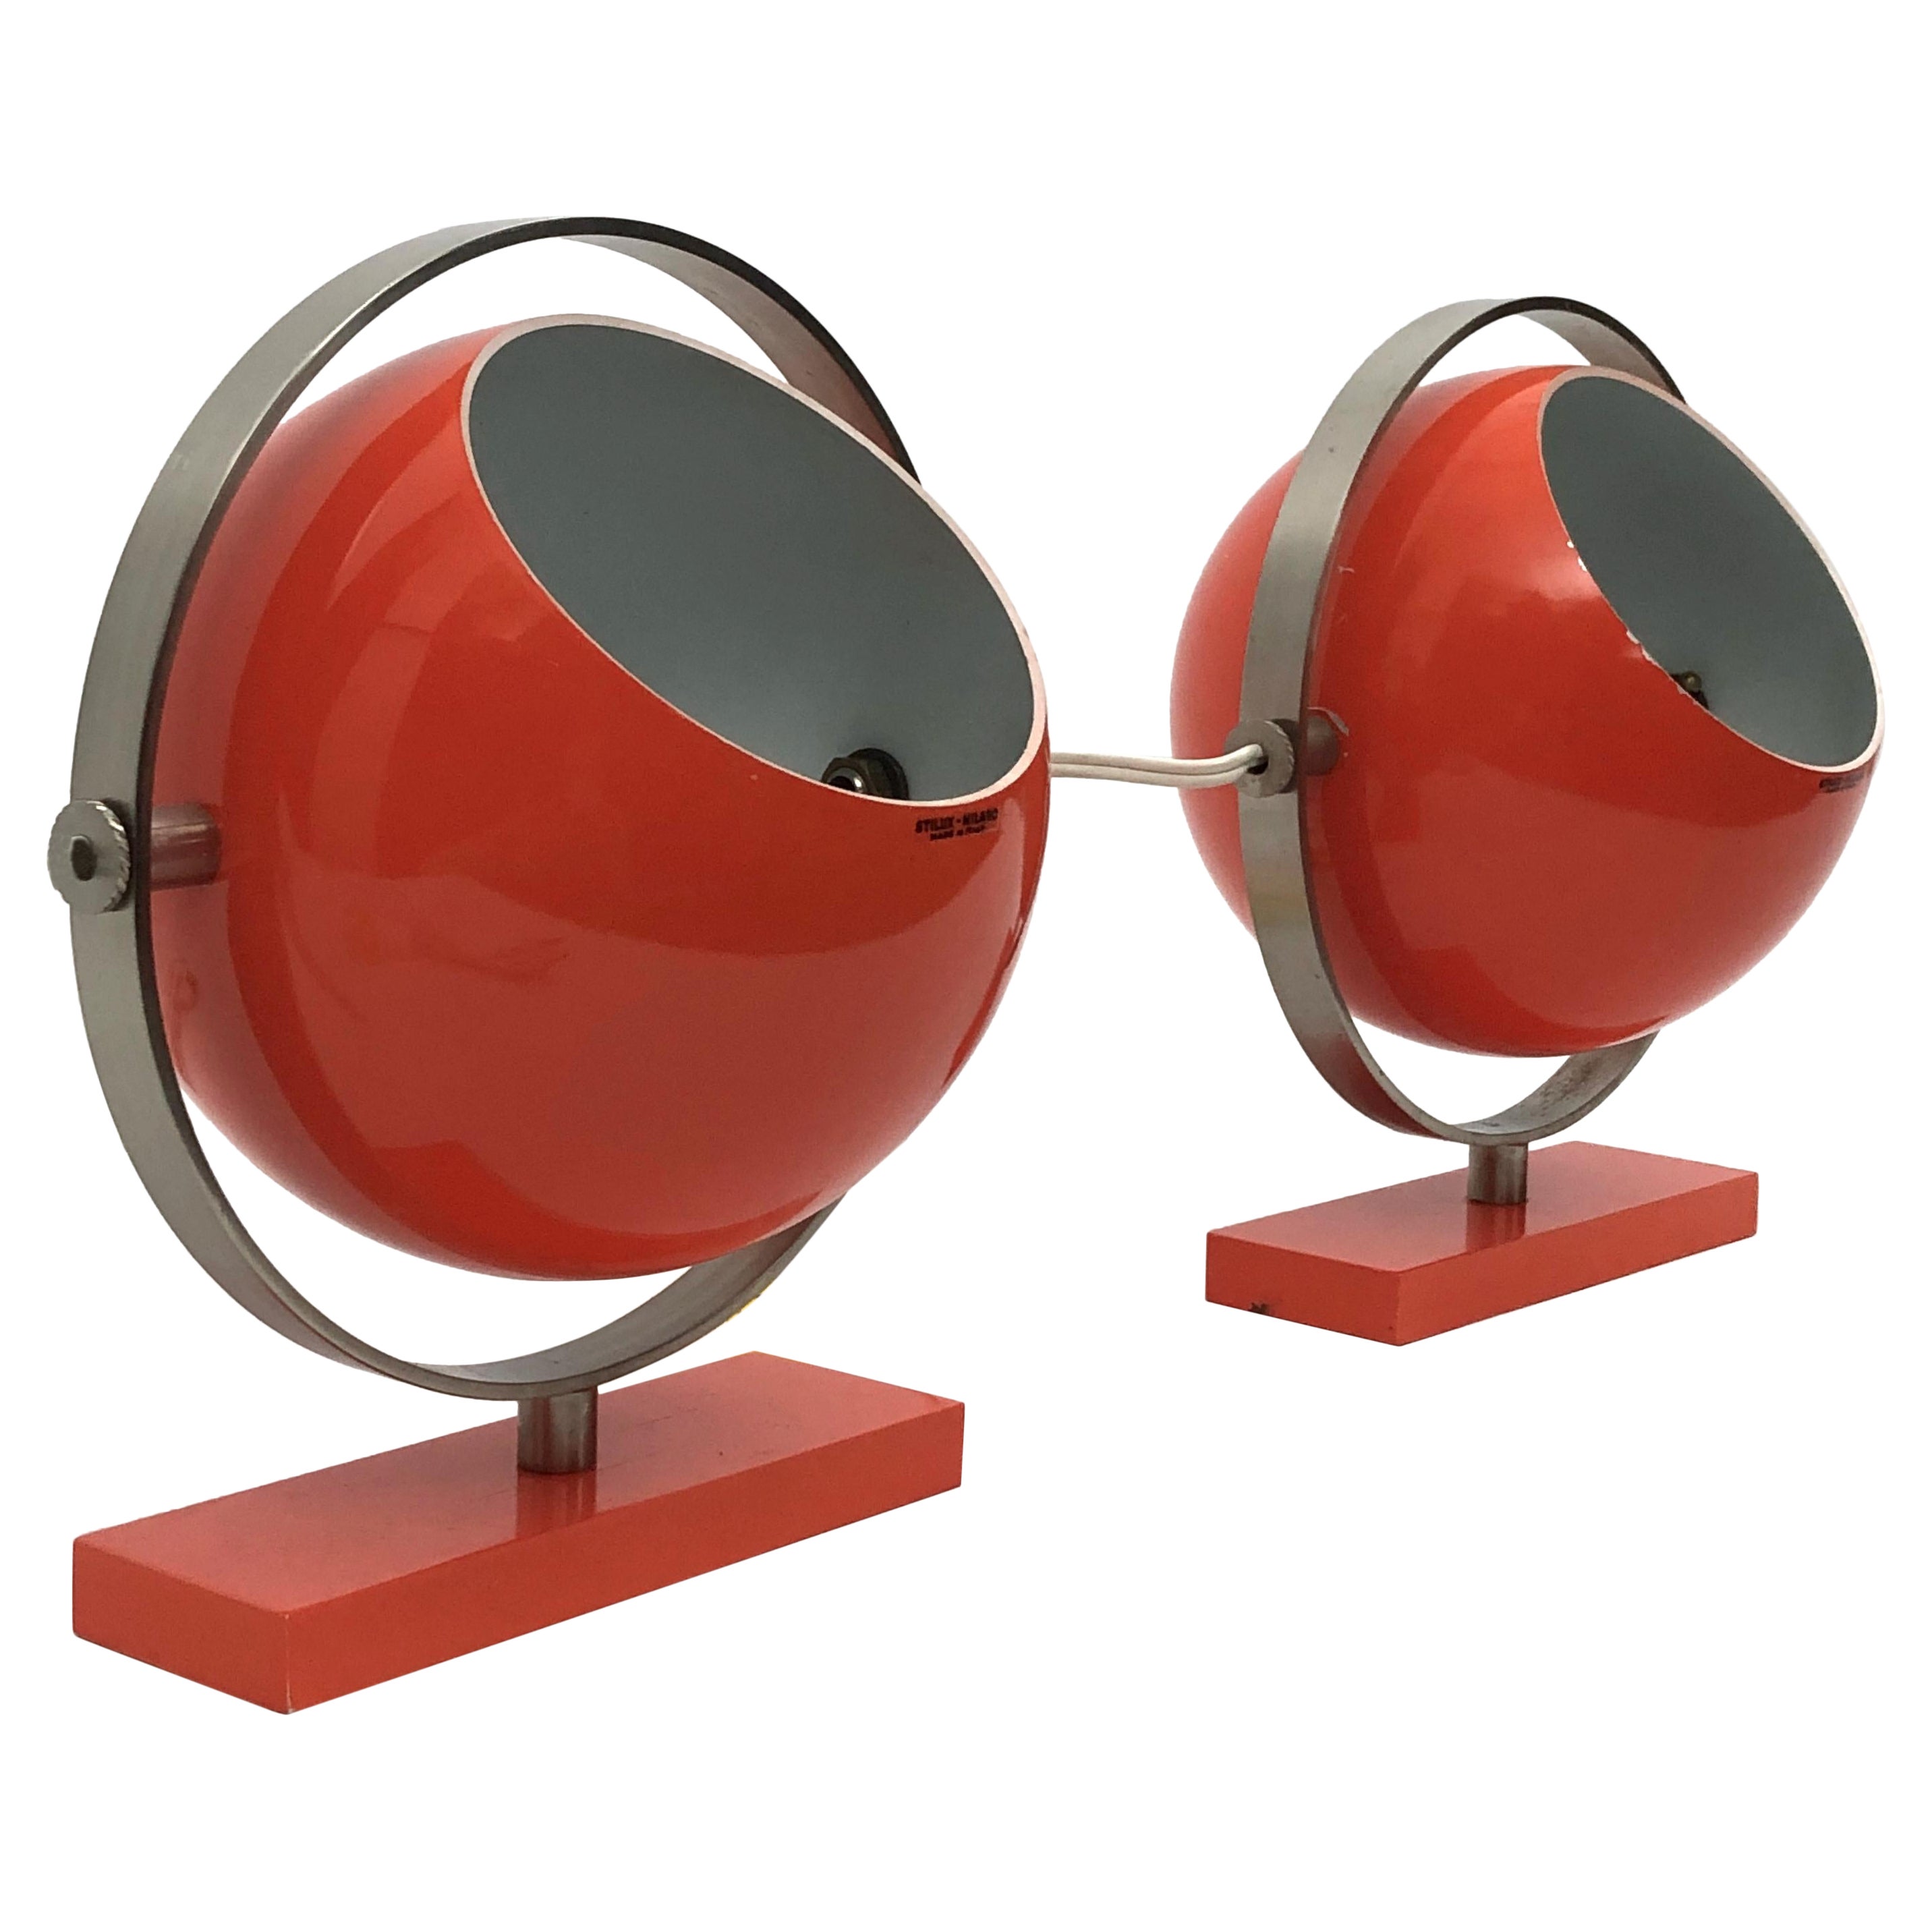 Stilux Milano Model Saba, Rare Orange Globe Table Lamps from 60s. Set of Two For Sale